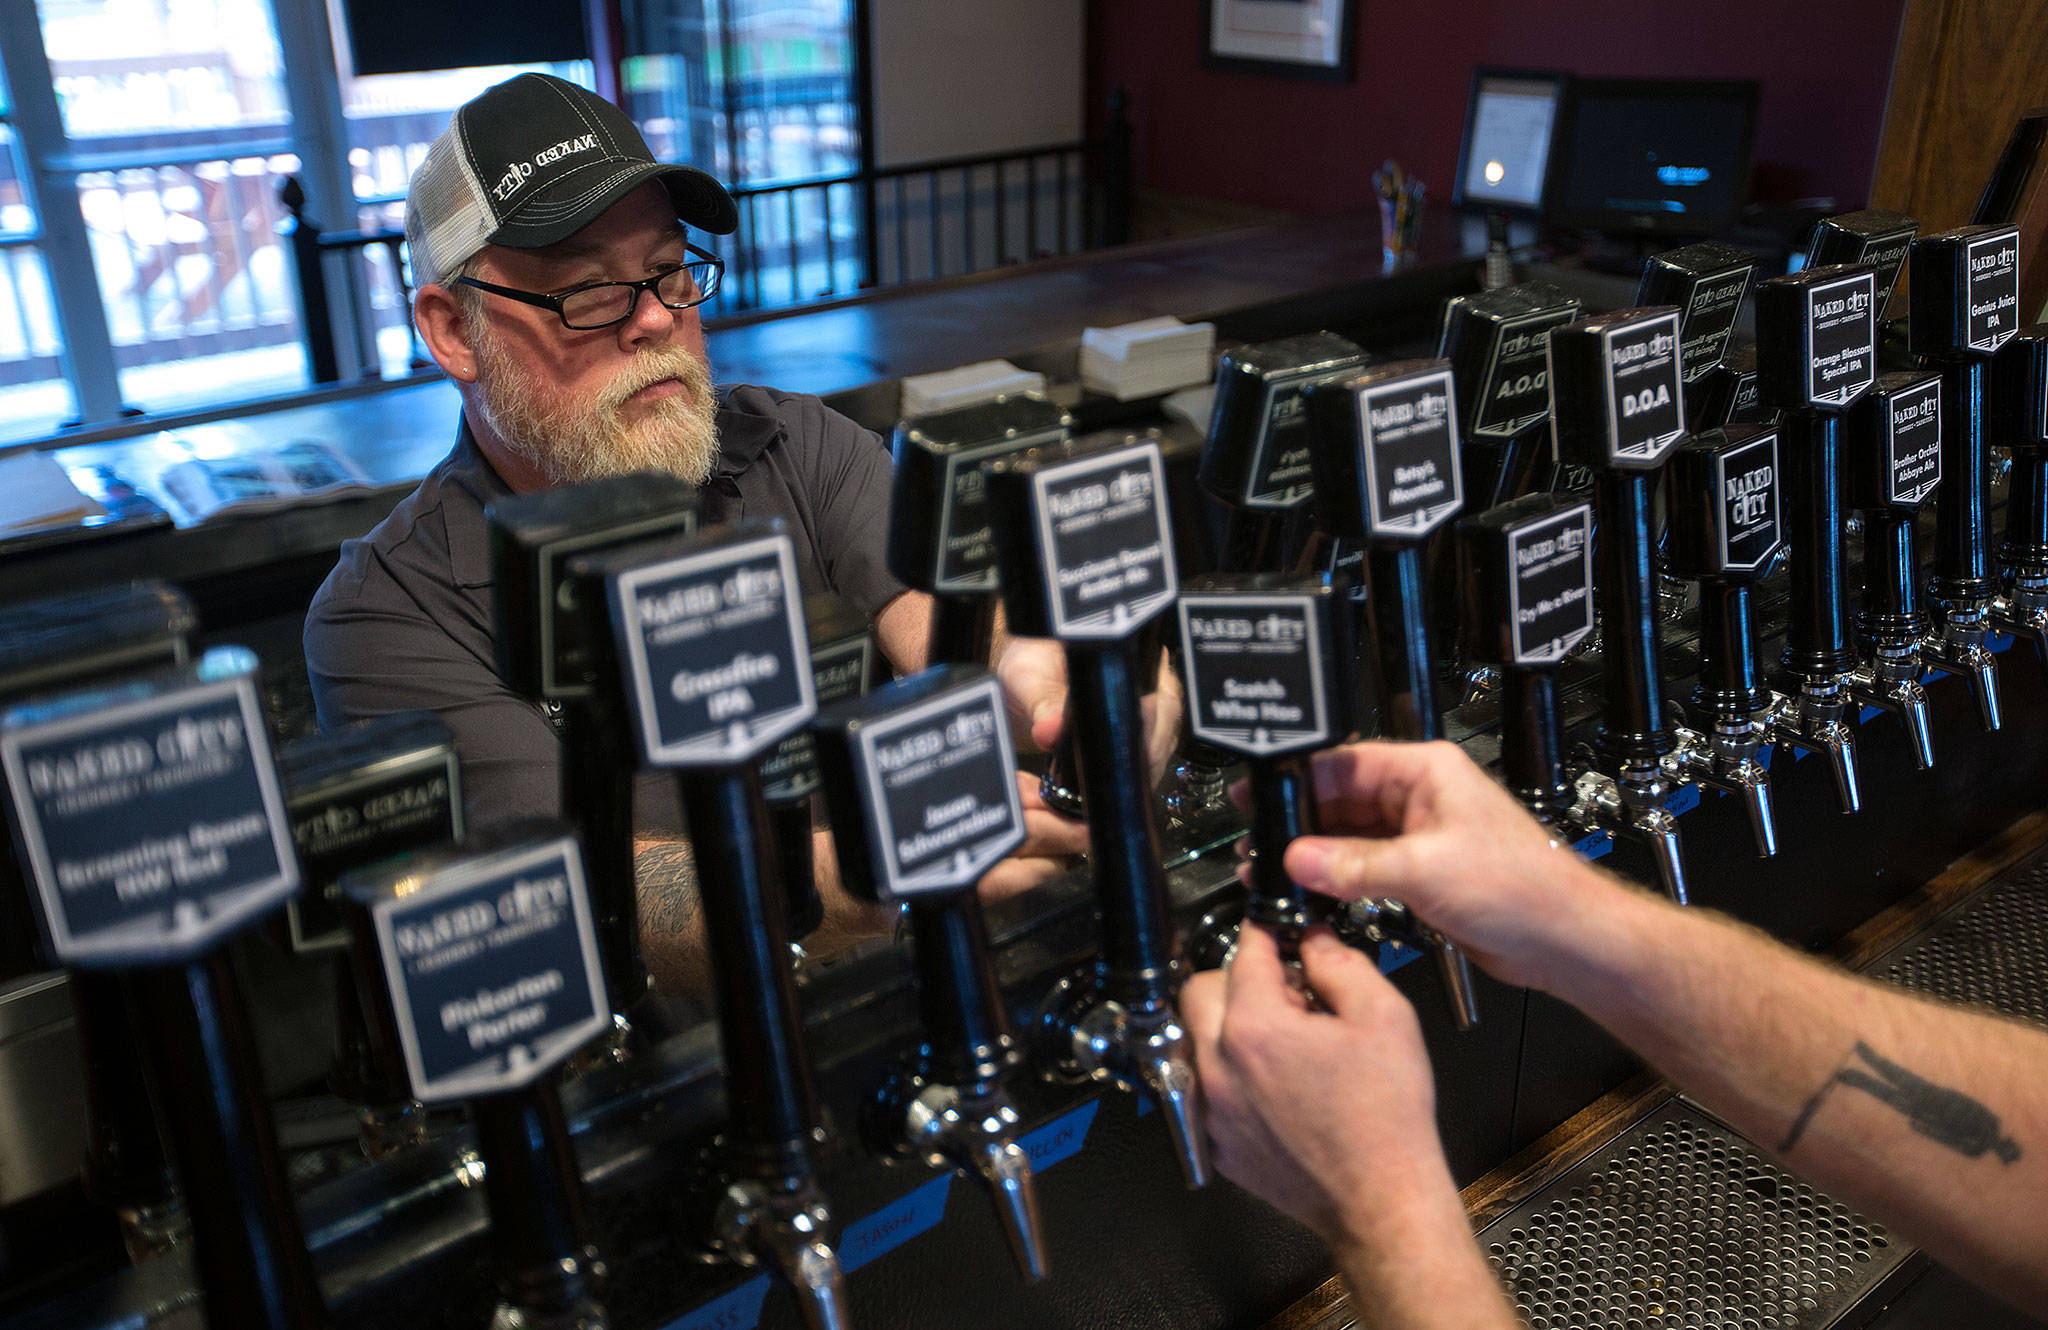 Owner Don Webb labels tap handles as he works to get Naked City Brewery ready for its soft opening on April 20 on Camano Island. (Andy Bronson / The Herald)